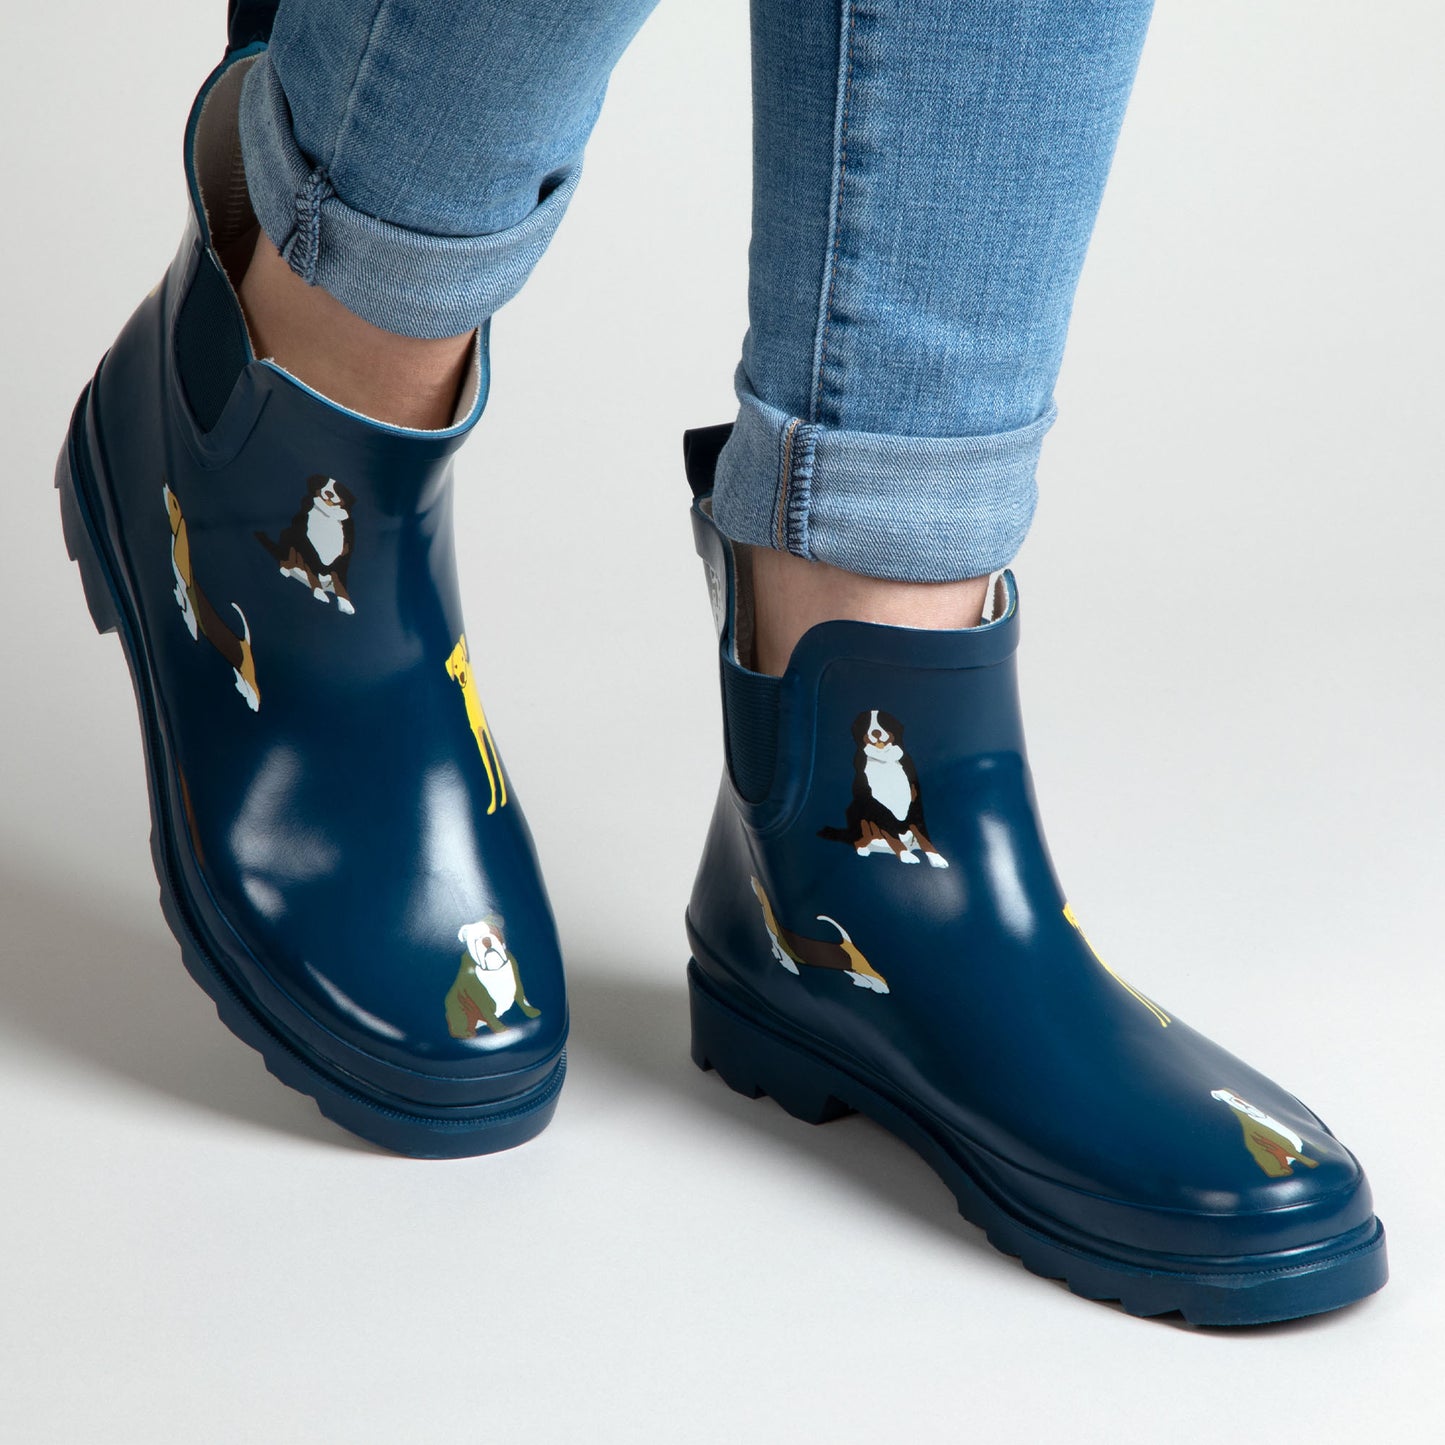 Dogs & Paws Rain Boots